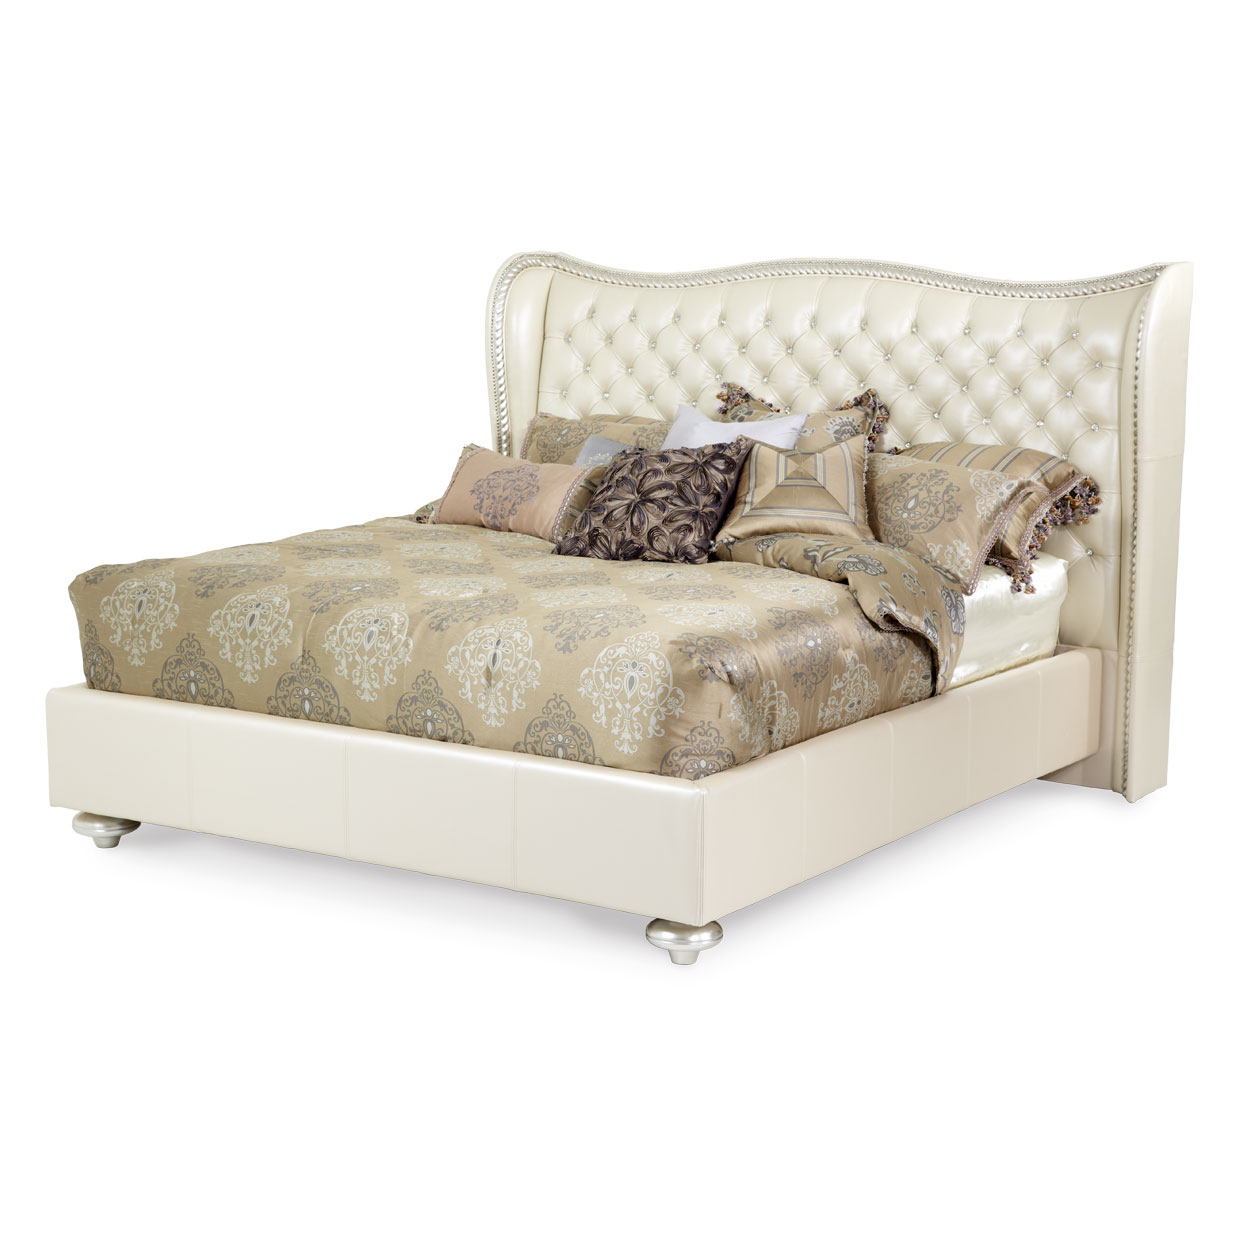 AICO Hollywood Swank Creamy Pearl Tufted White Leather and Crystal Queen Bed 4PC Bedroom Set